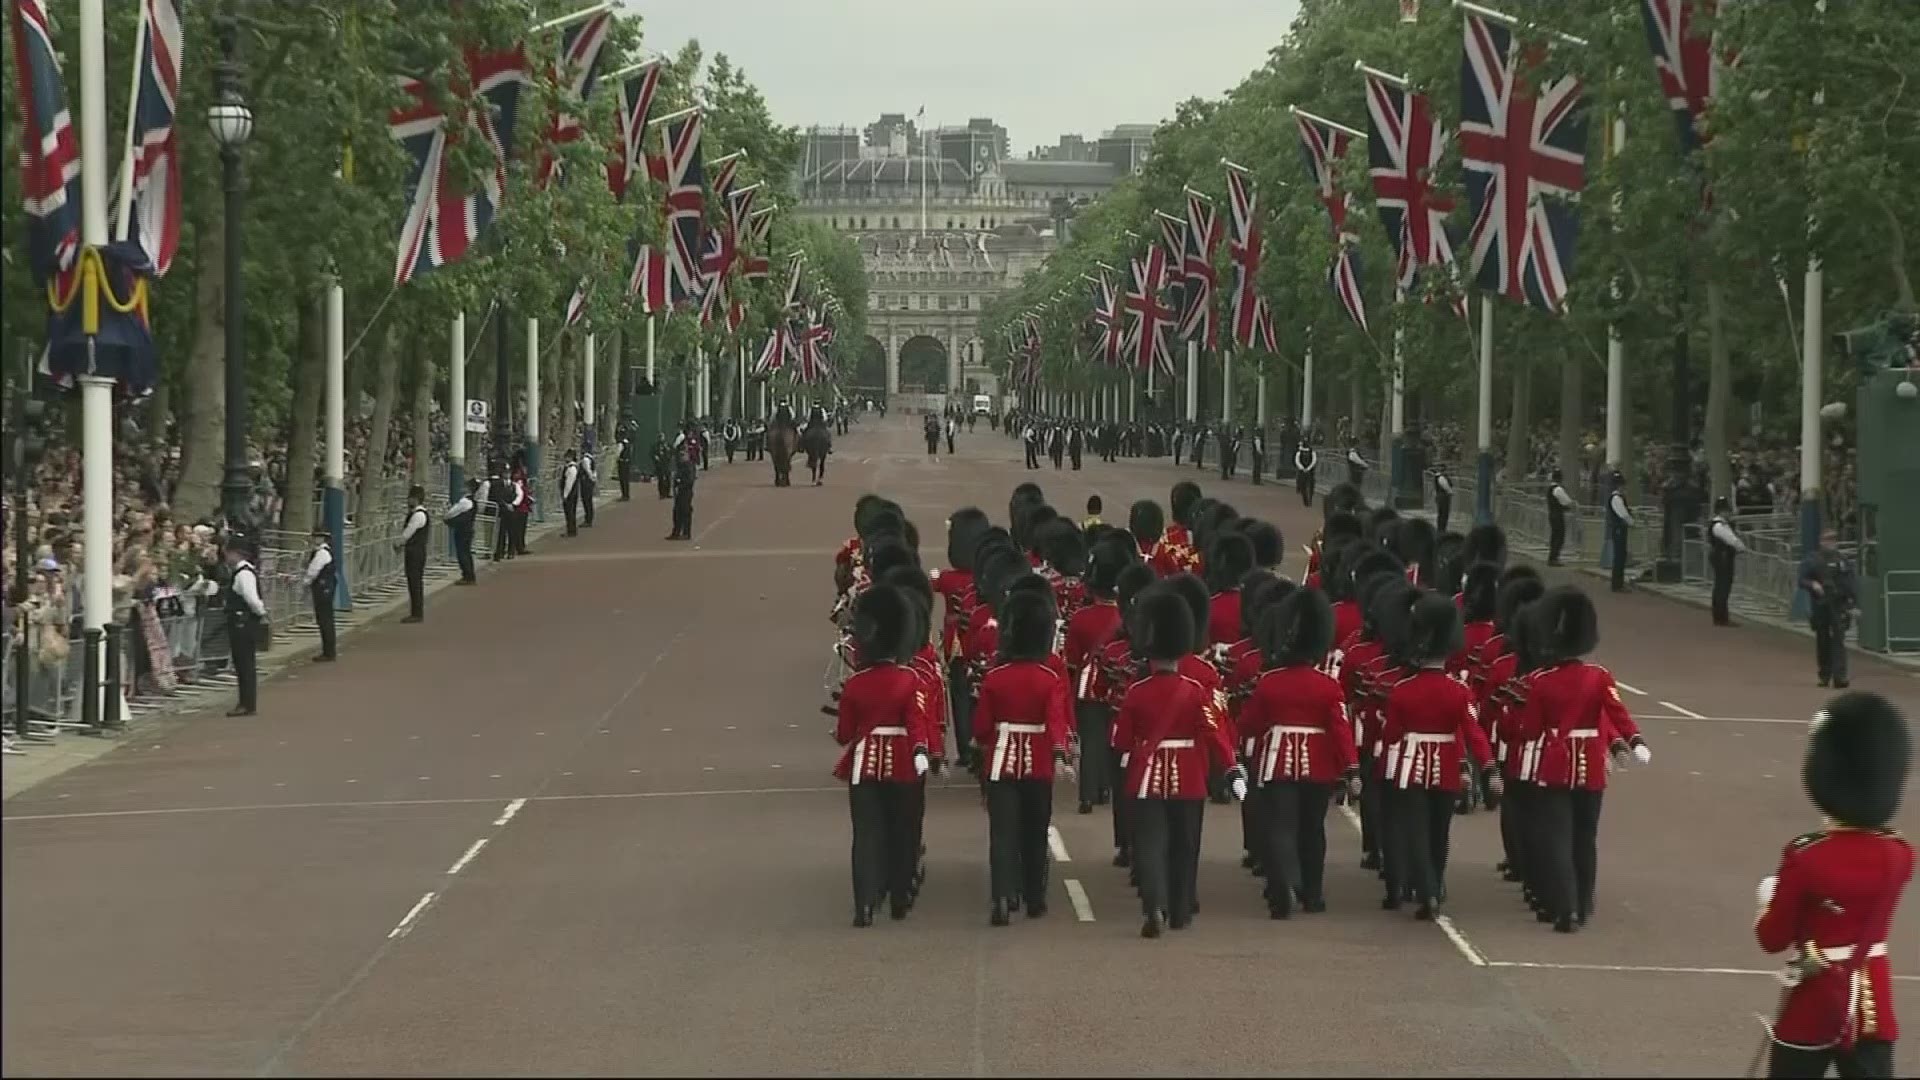 The Royal Family and thousands of spectators joined the Queen on Saturday for her official birthday, marked with the annual Trooping the Colour parade.